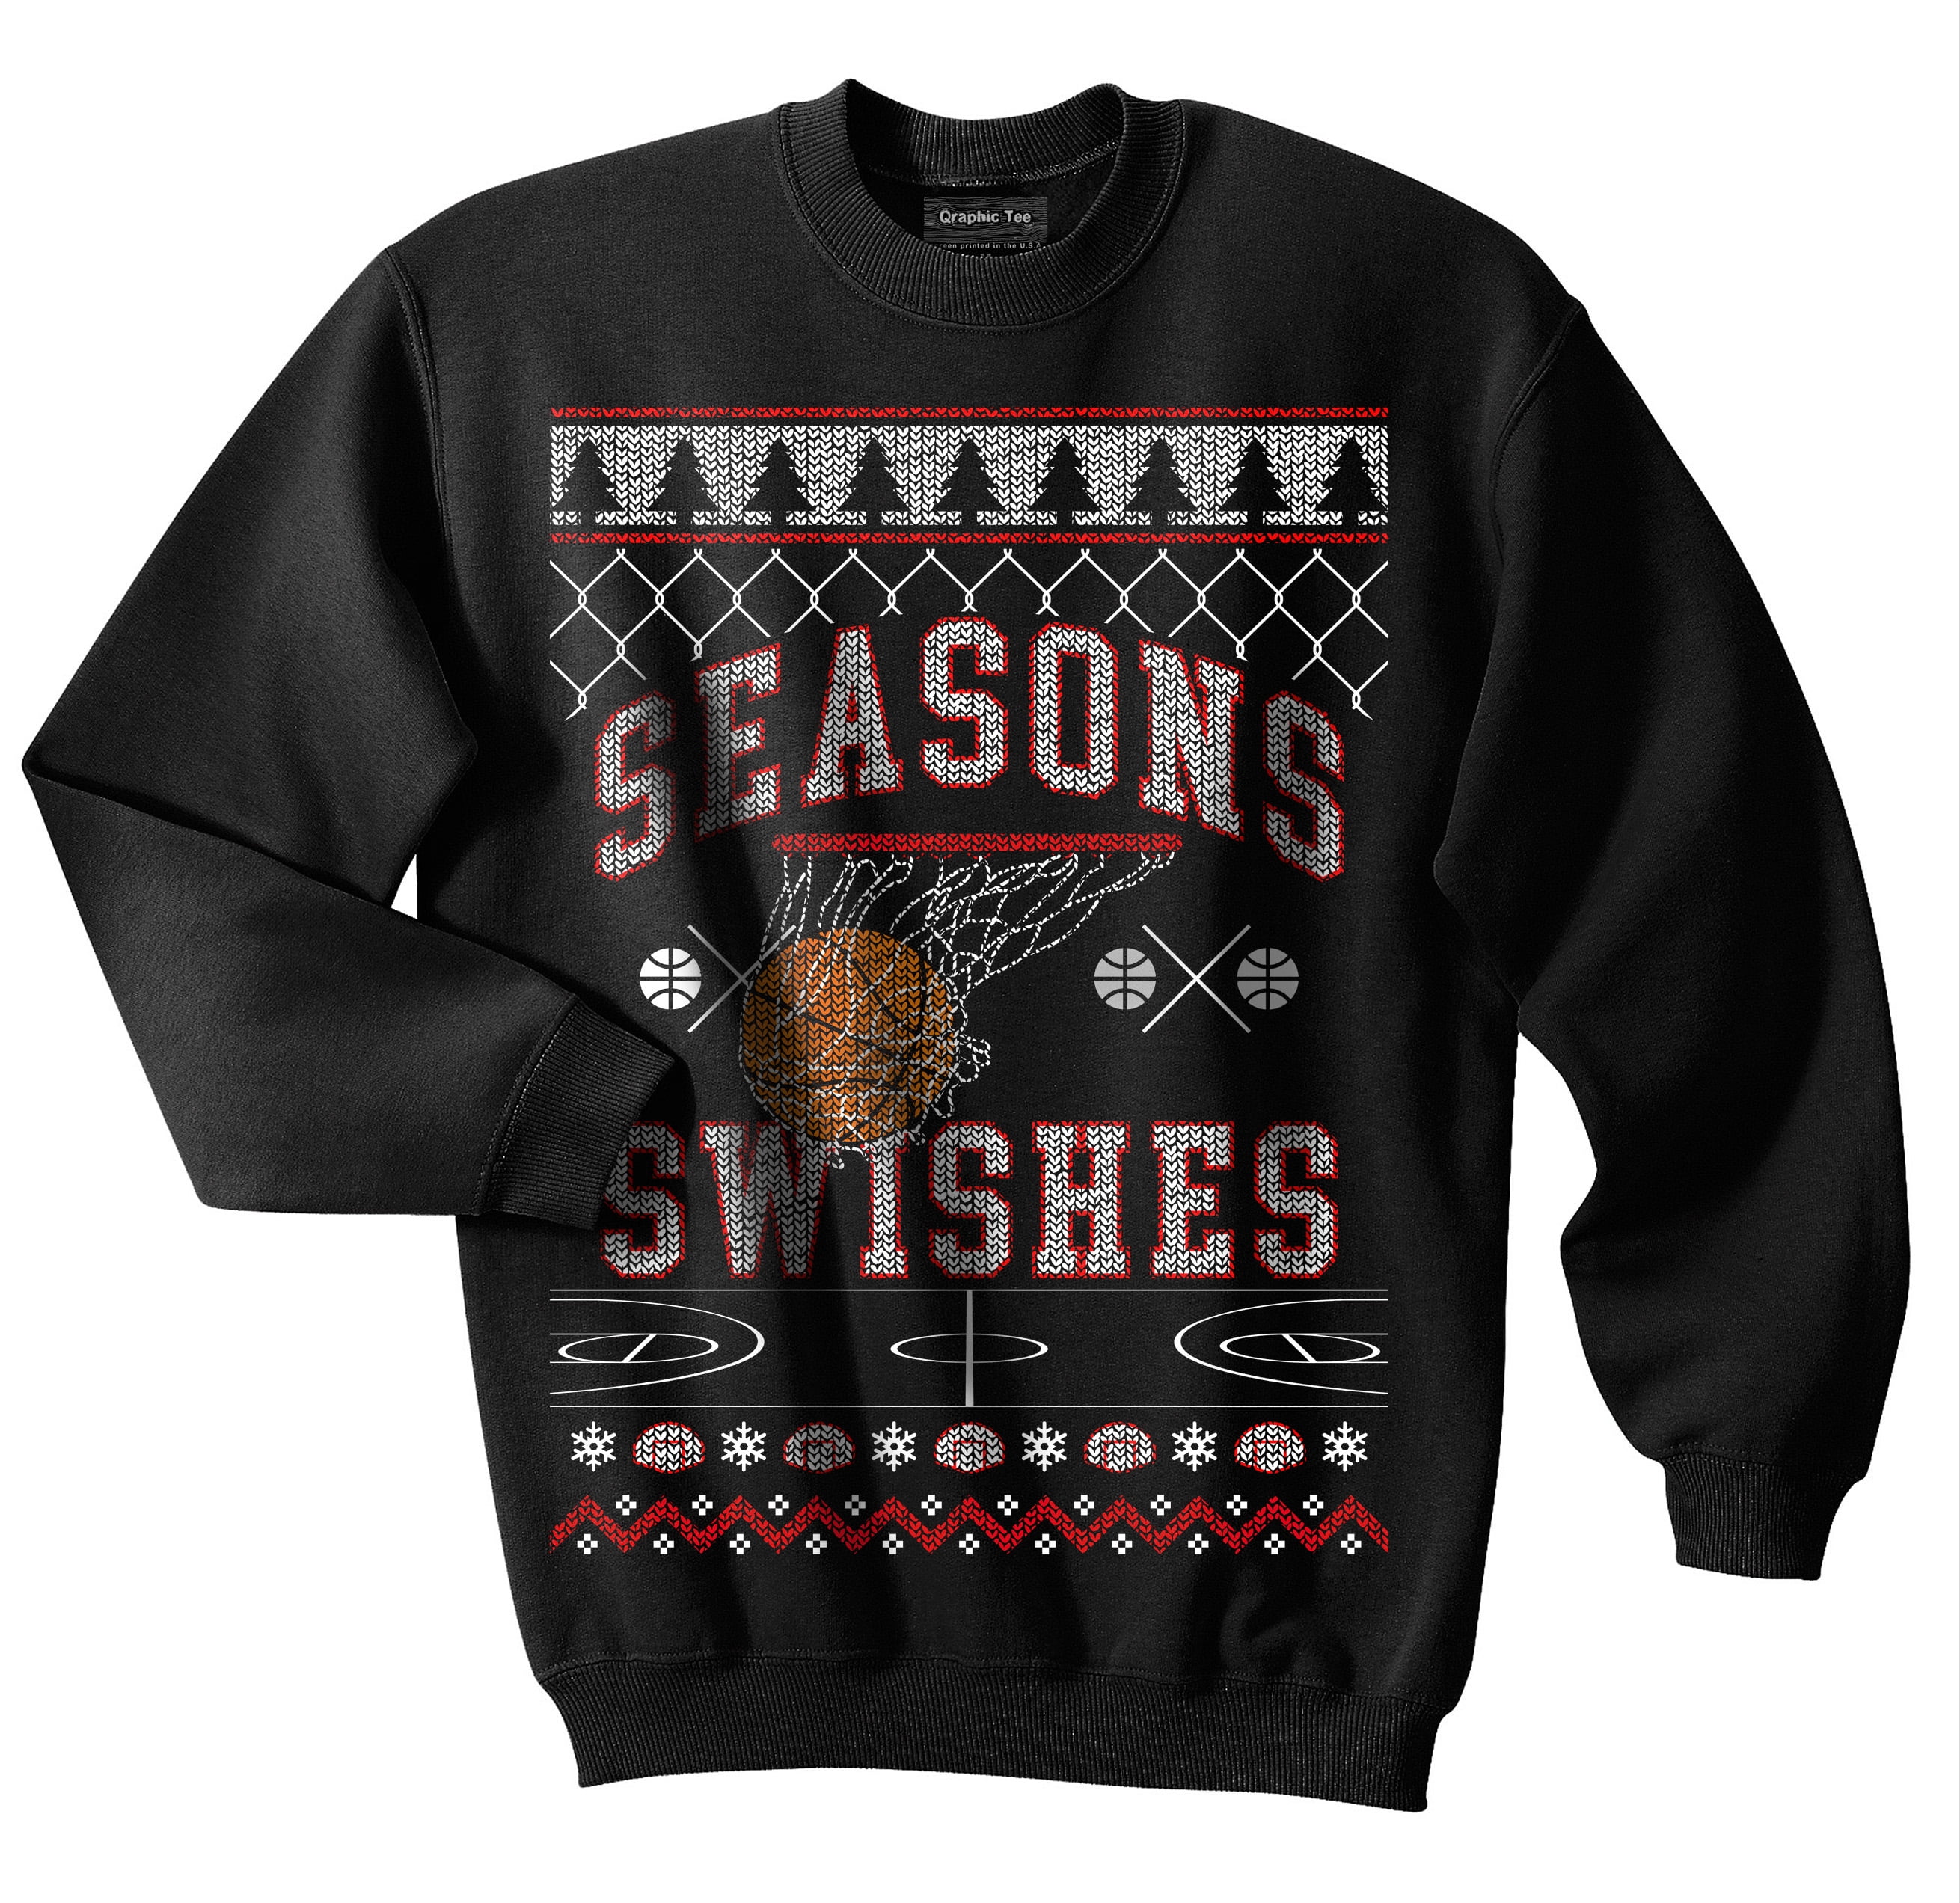 NBA Ugly Sweaters, NBA Ugly Holiday Sweater Collection